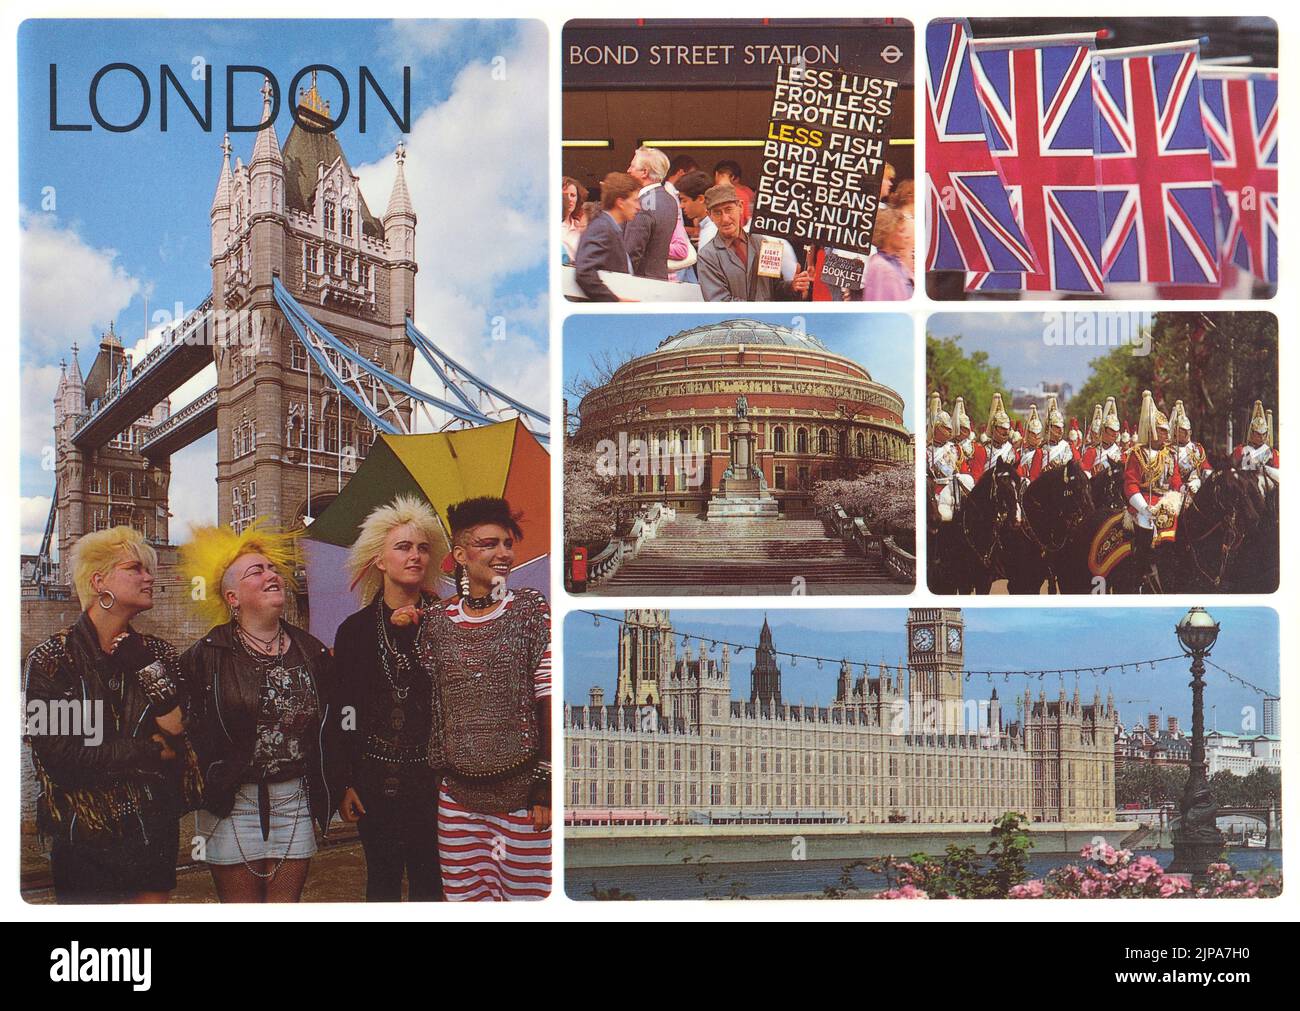 1980's London postcard showing various views and attractions. Photos by Chris Parker Stock Photo